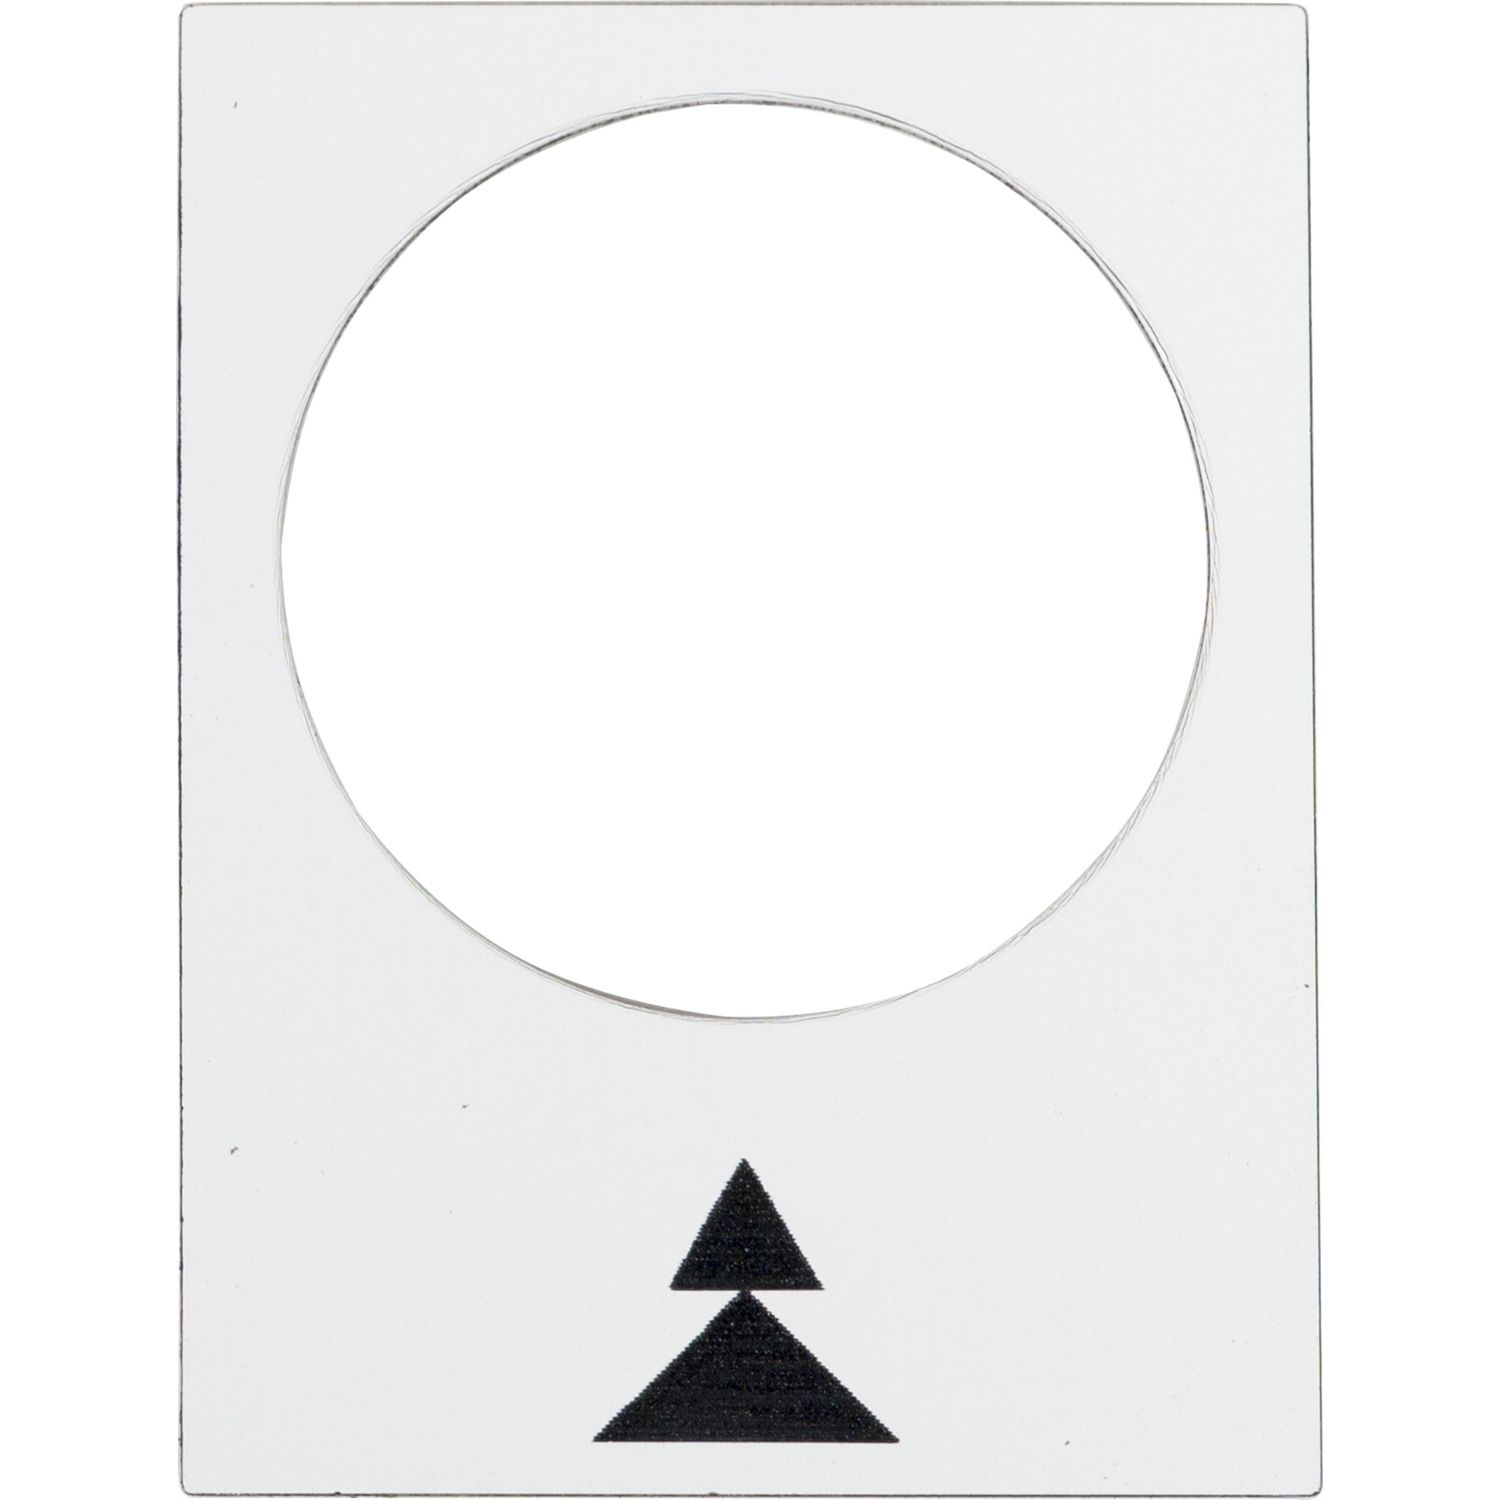 ZB2BY4909 Marked legend, Harmony XAC, nameplate, 30 x 40mm, plastic, white, 22mm push button, black marked up double arrowhead